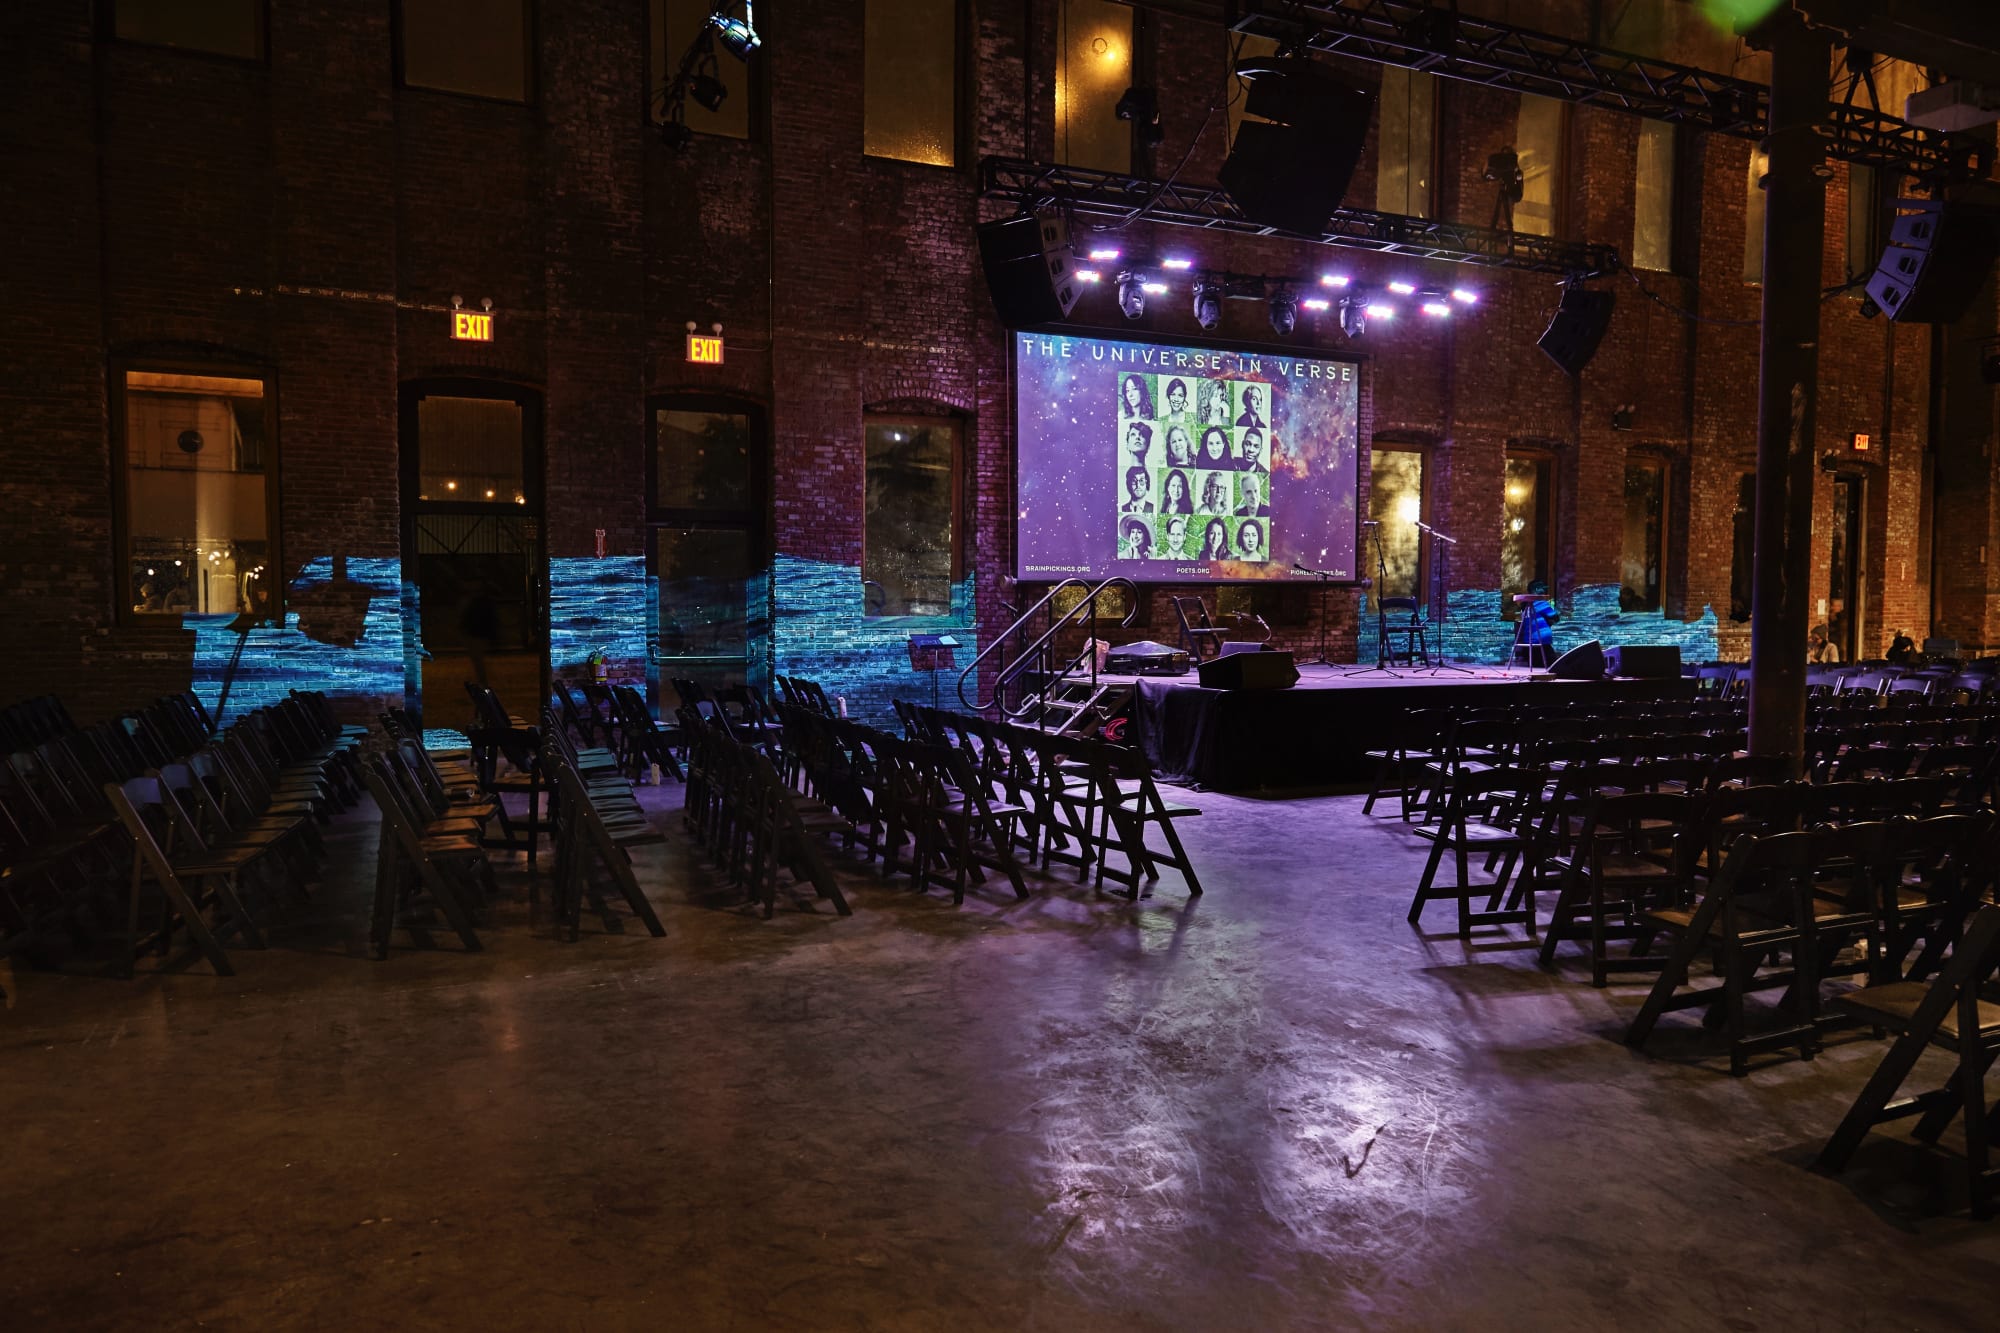 Photograph of a large empty room with over a hundred empty folding chairs. A small stage is in the center and above it a screen indicates the name of the event: 'The Universe In Verse.' A video of a body of water is projected on the brick wall in the background.